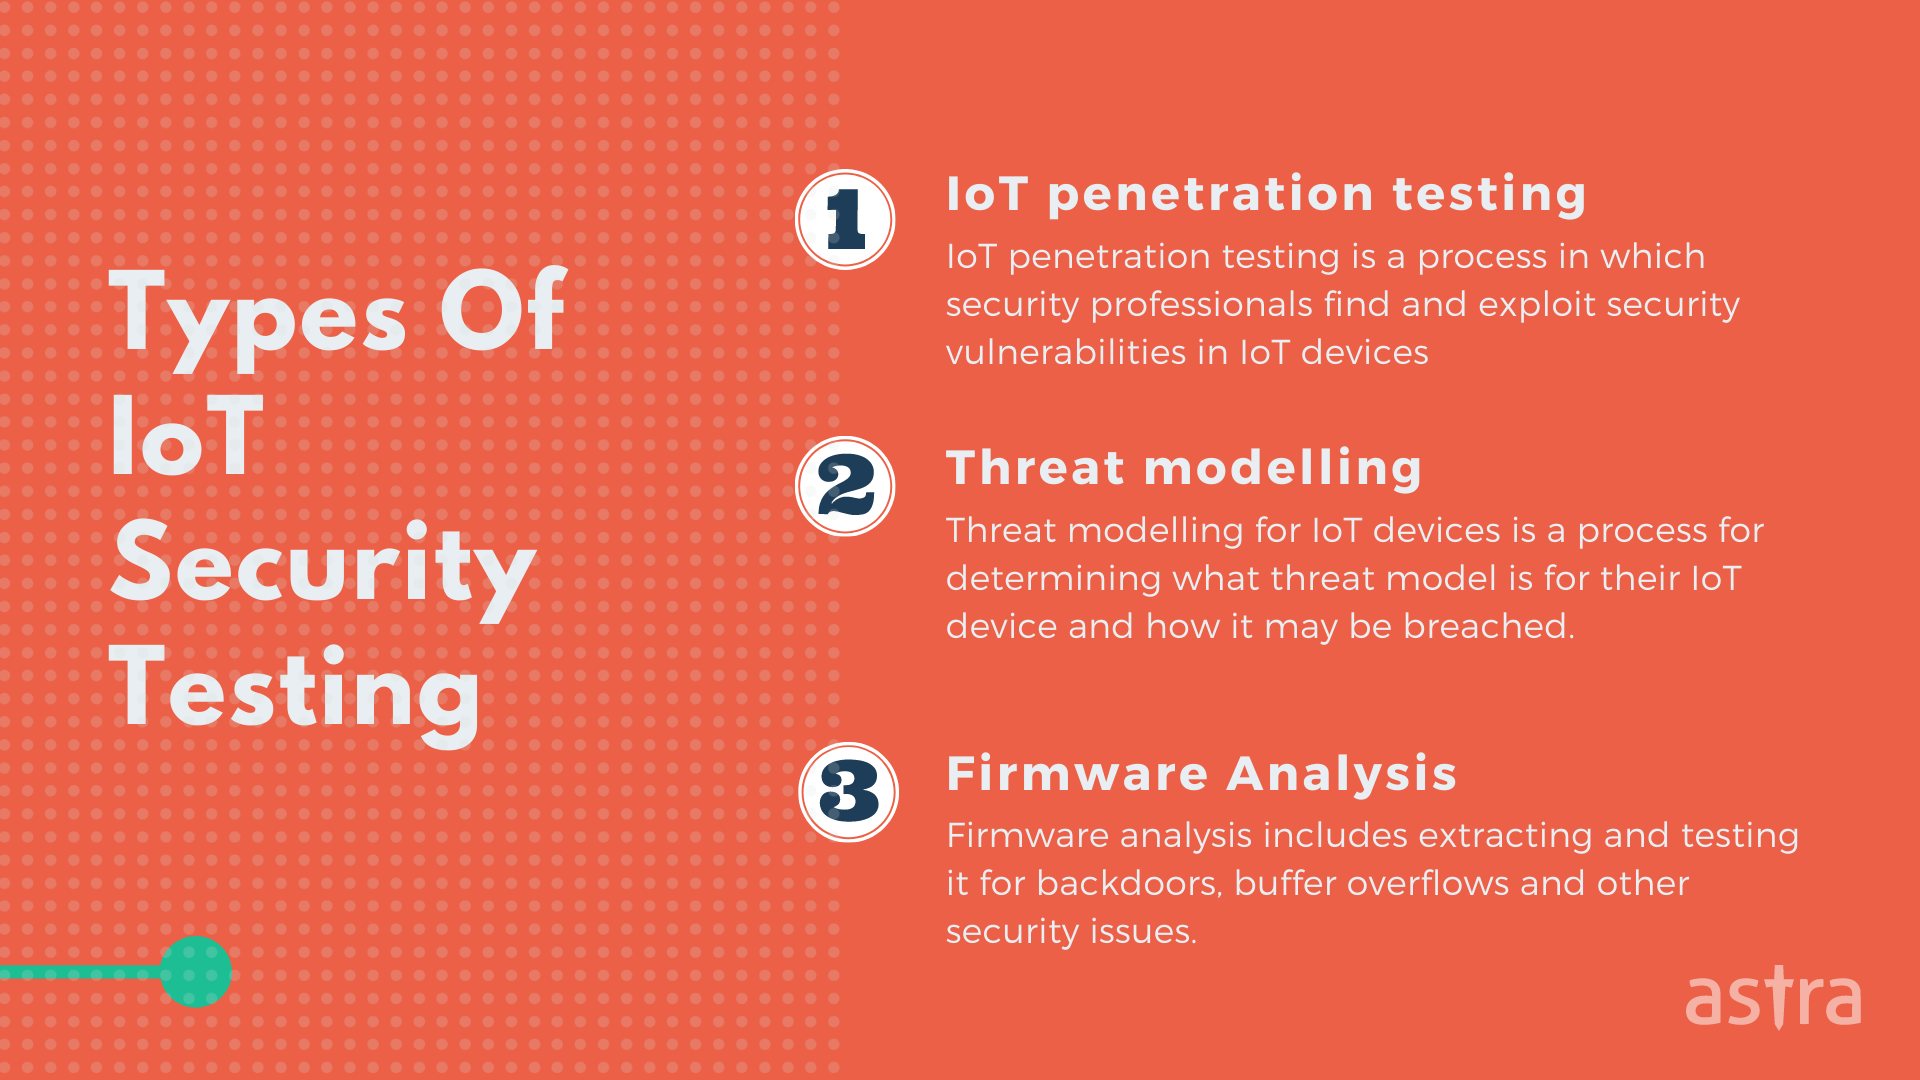 Types of IoT Security Testing